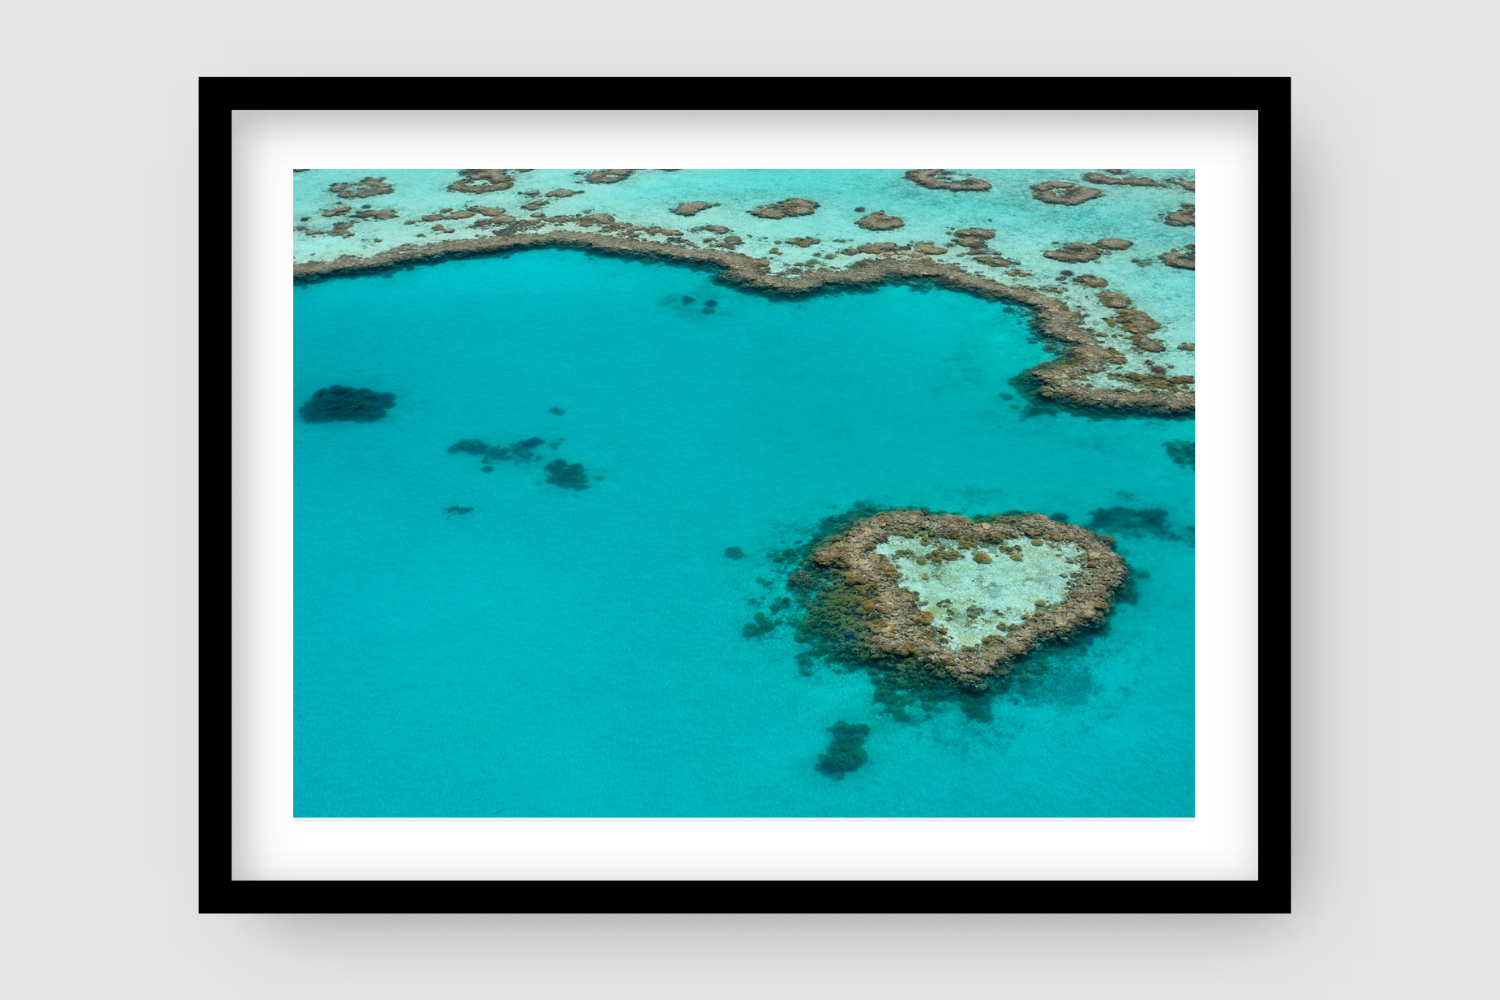 large heart shaped coral reef island surrounded by turquise water and more reef